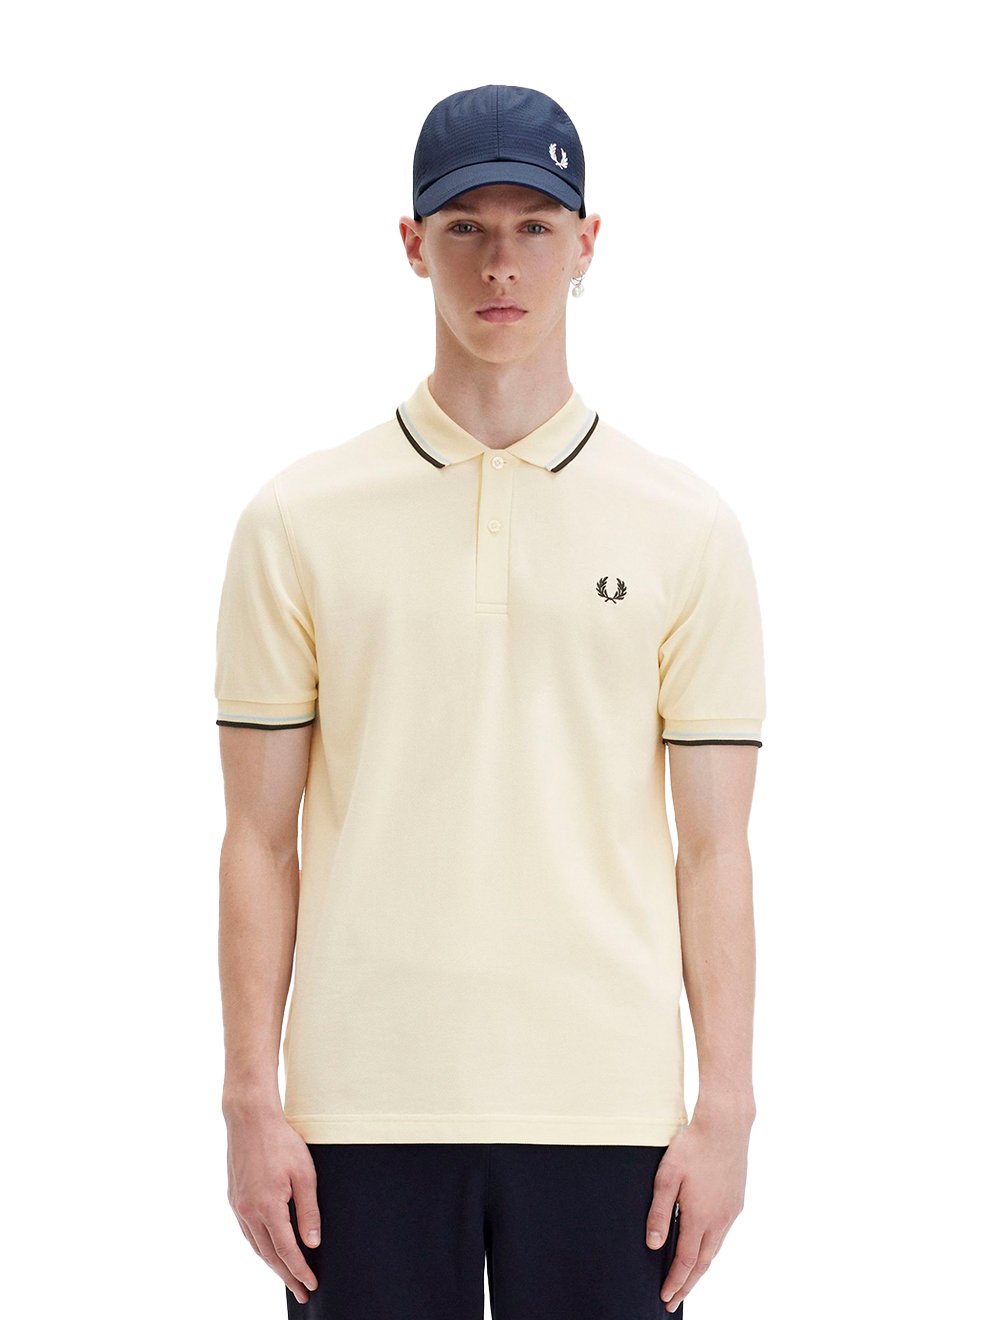 Polo Fred Perry Masculina Piquet Regular Color Twin Tipped Amarelo Claro